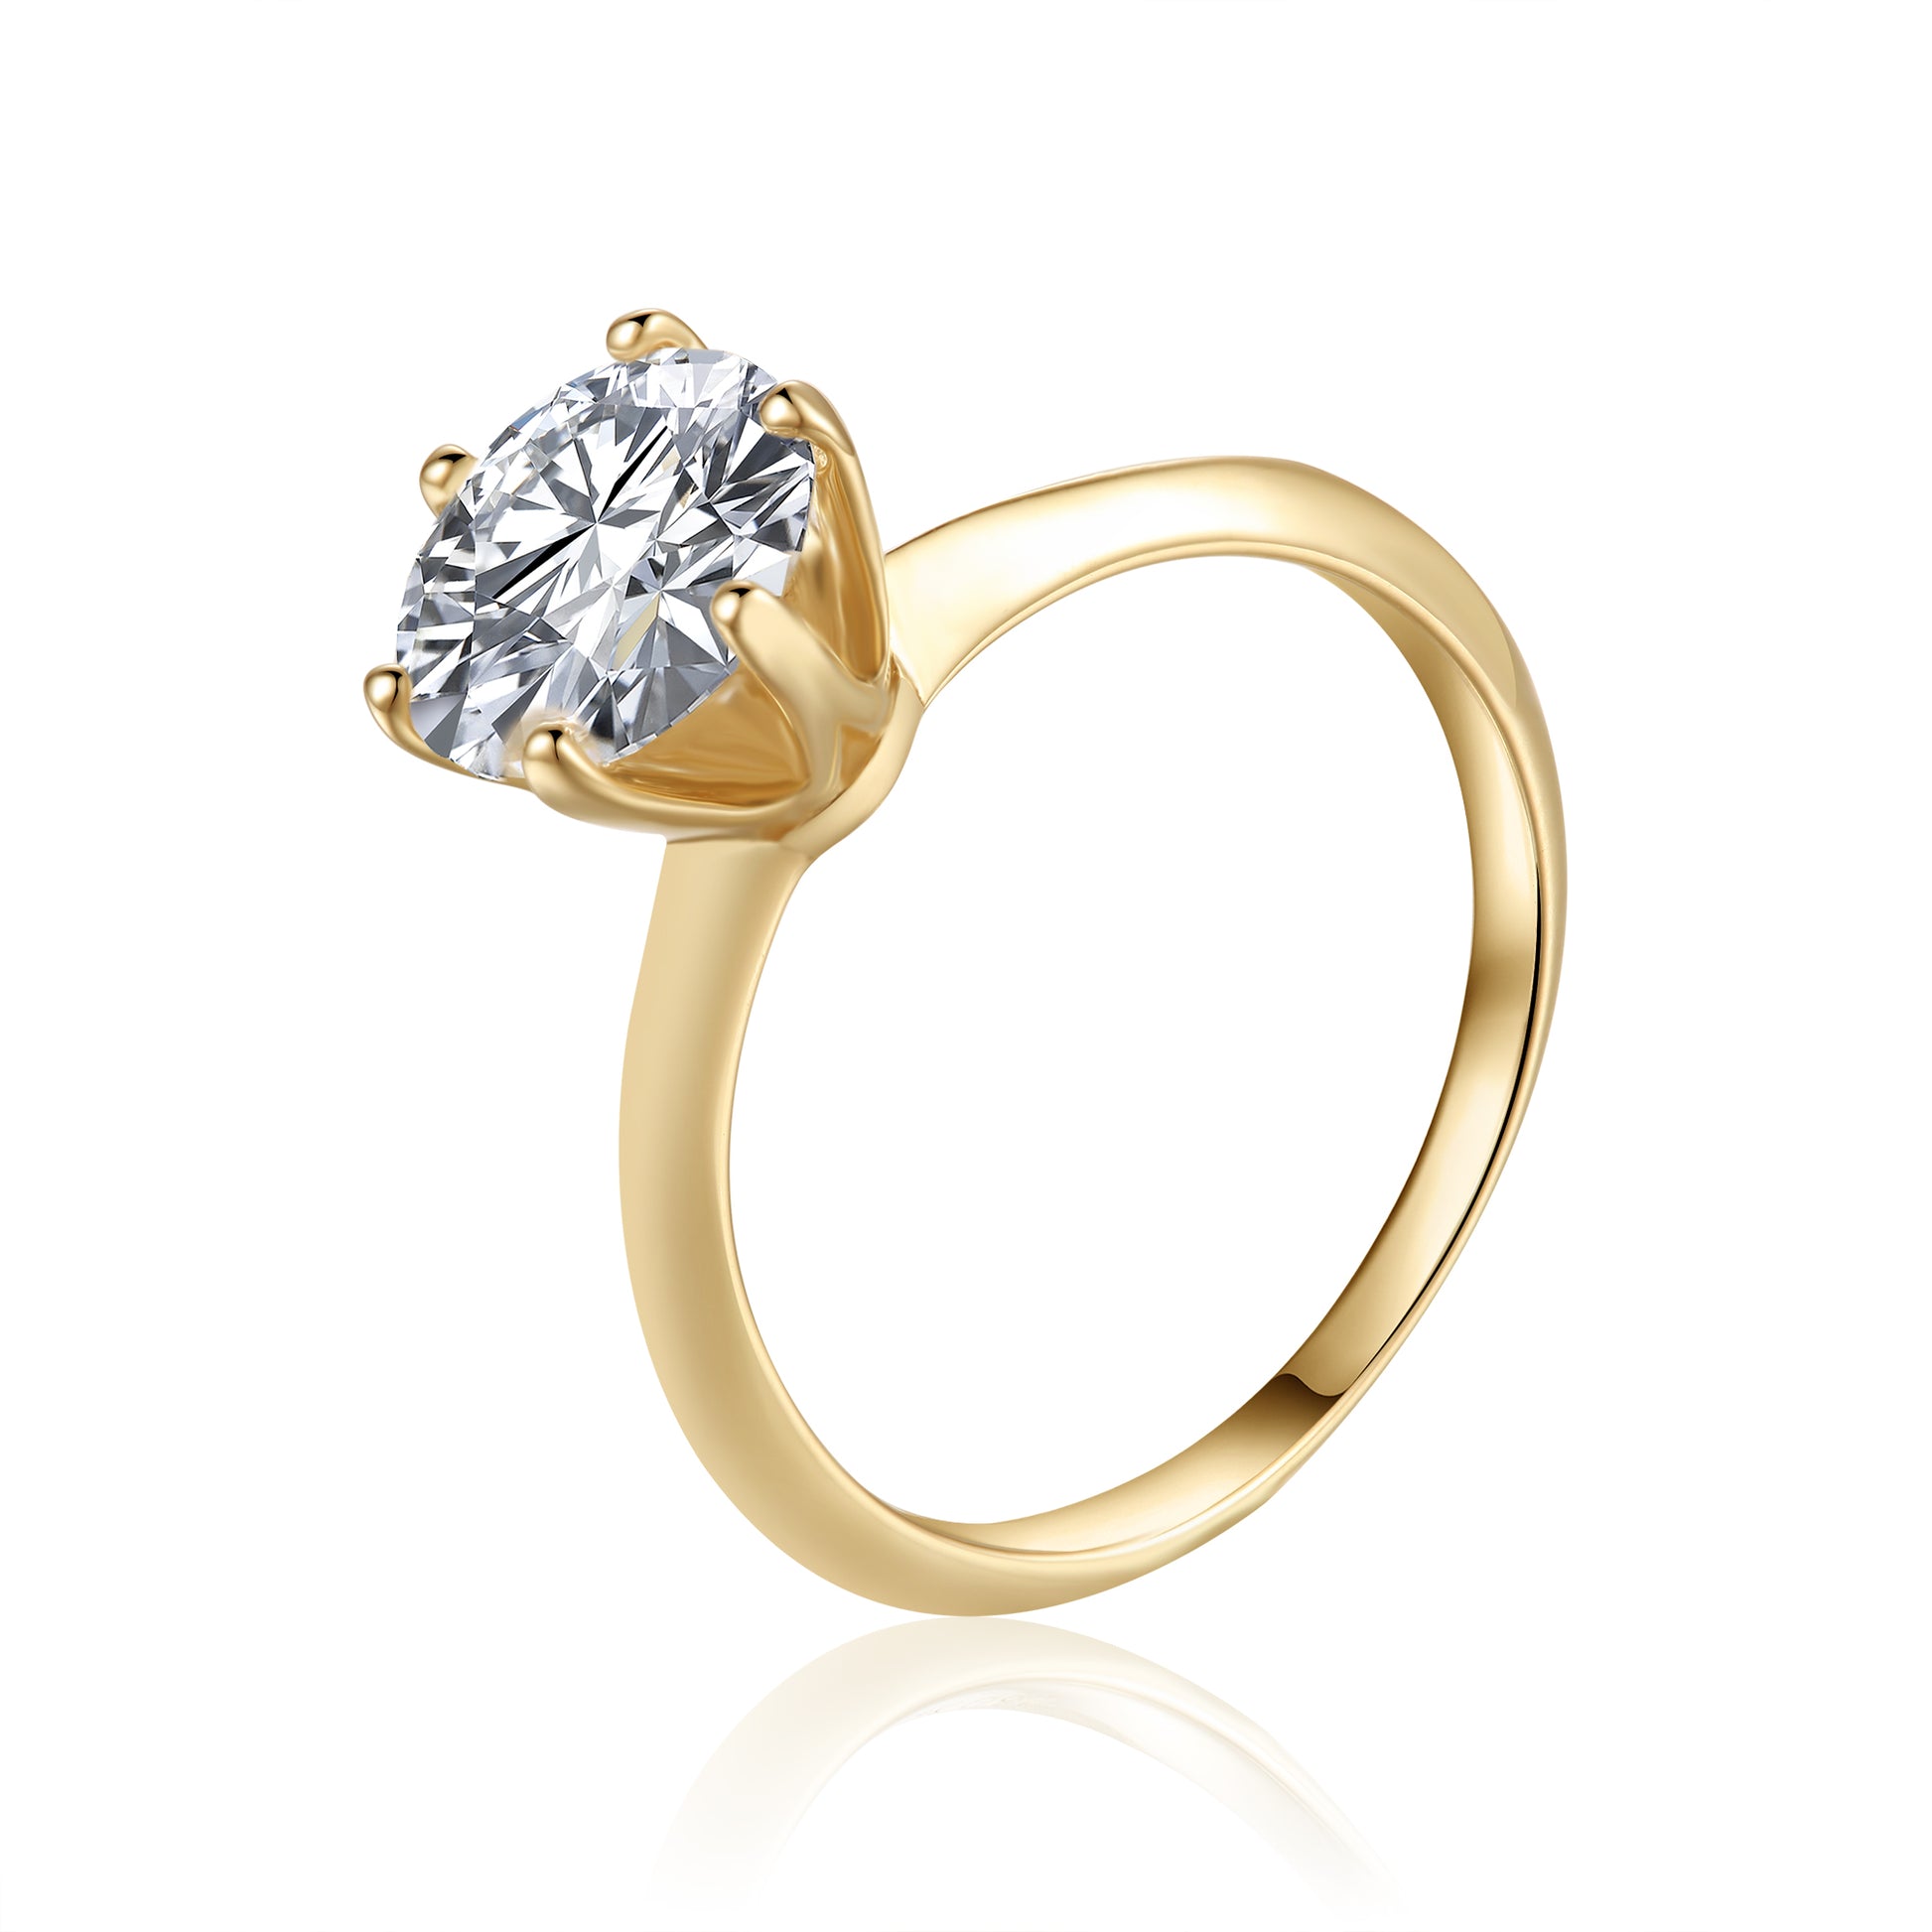 Aletté Winckler - Solitaire Tiffany 6 Claw Setting 3.00ct Moissanite Engagement Ring Set 9ct Yellow Gold